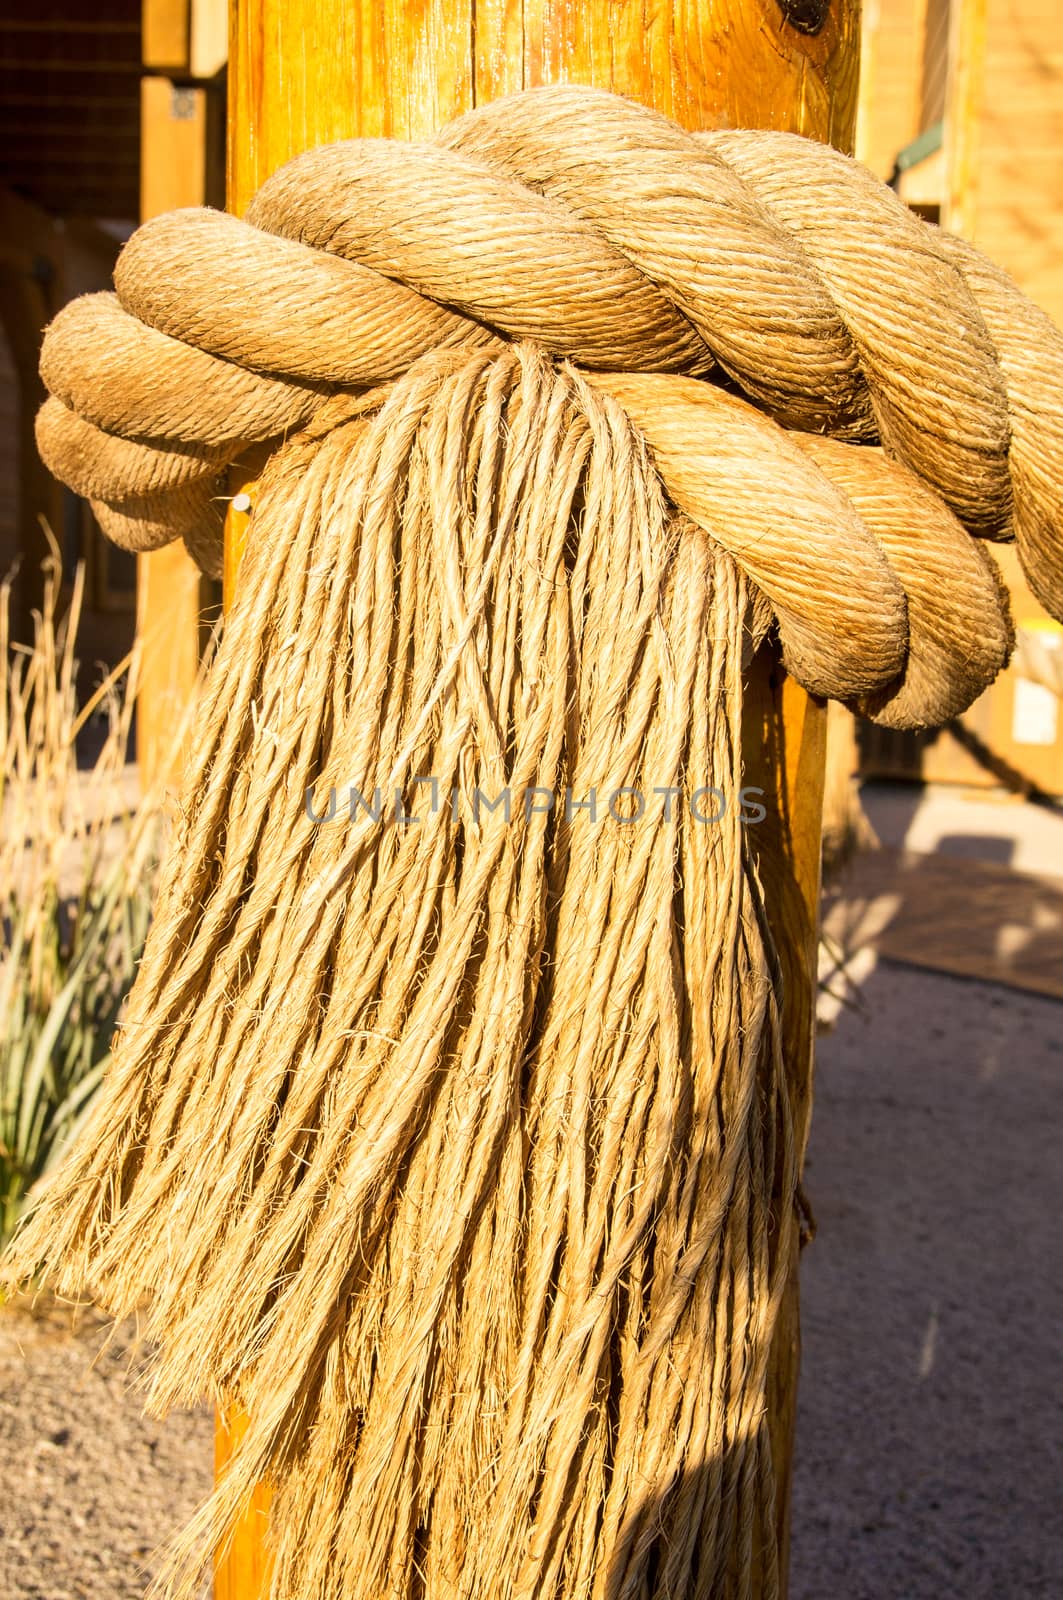 Sunlight glows on fringed rope on a wooden post